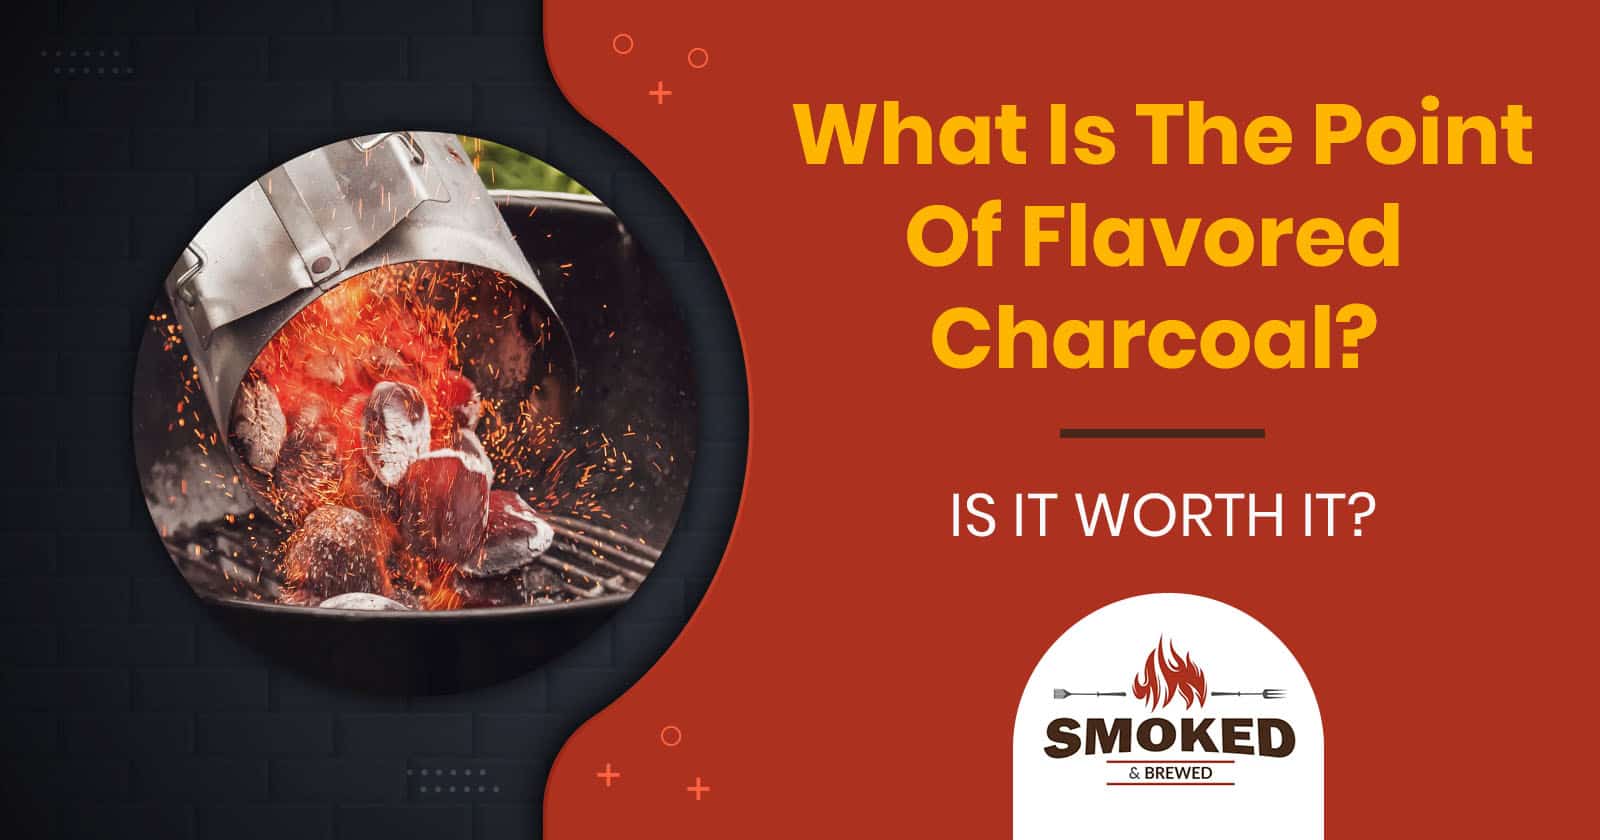 flavored charcoal